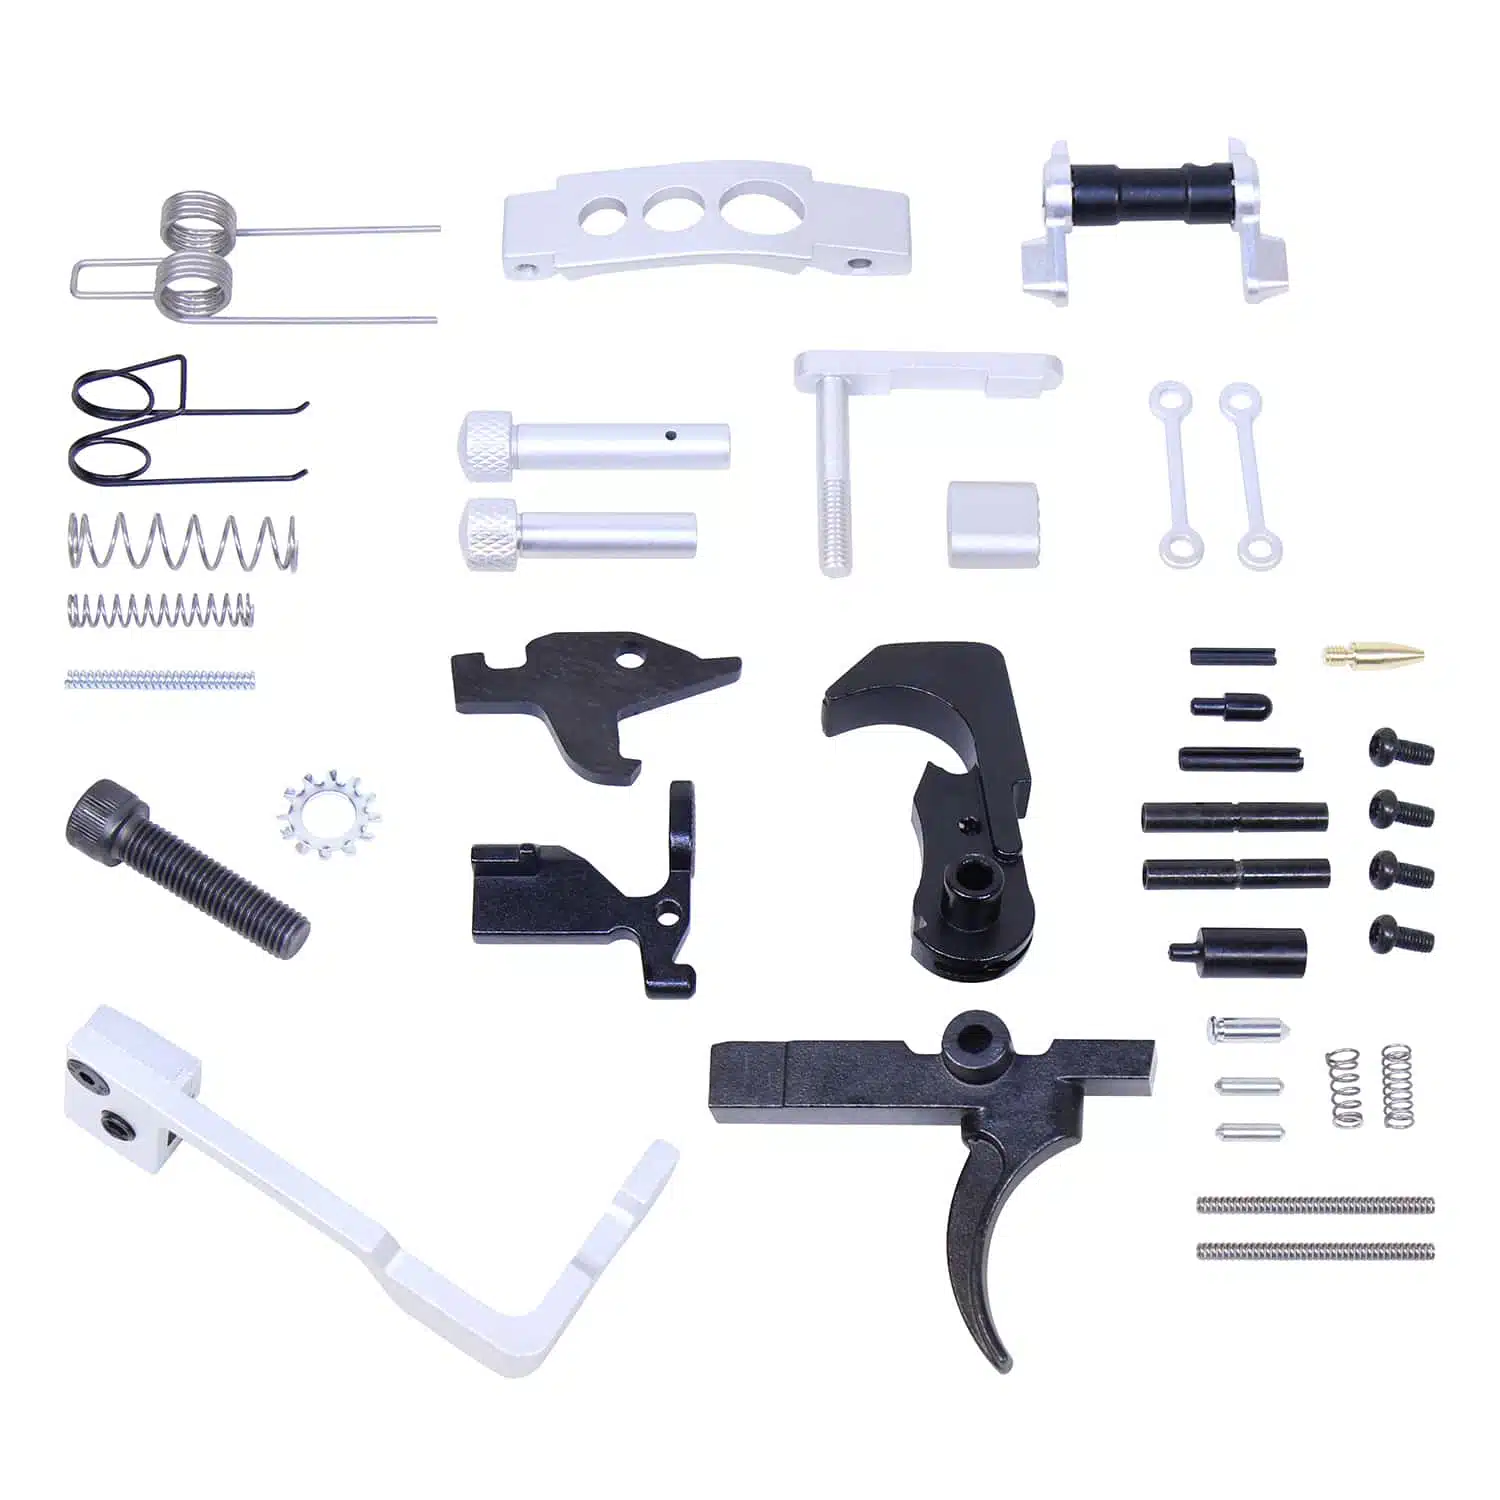 AR-15 Upgraded Enhanced Lower Parts Kit in Anodized Clear Aluminum